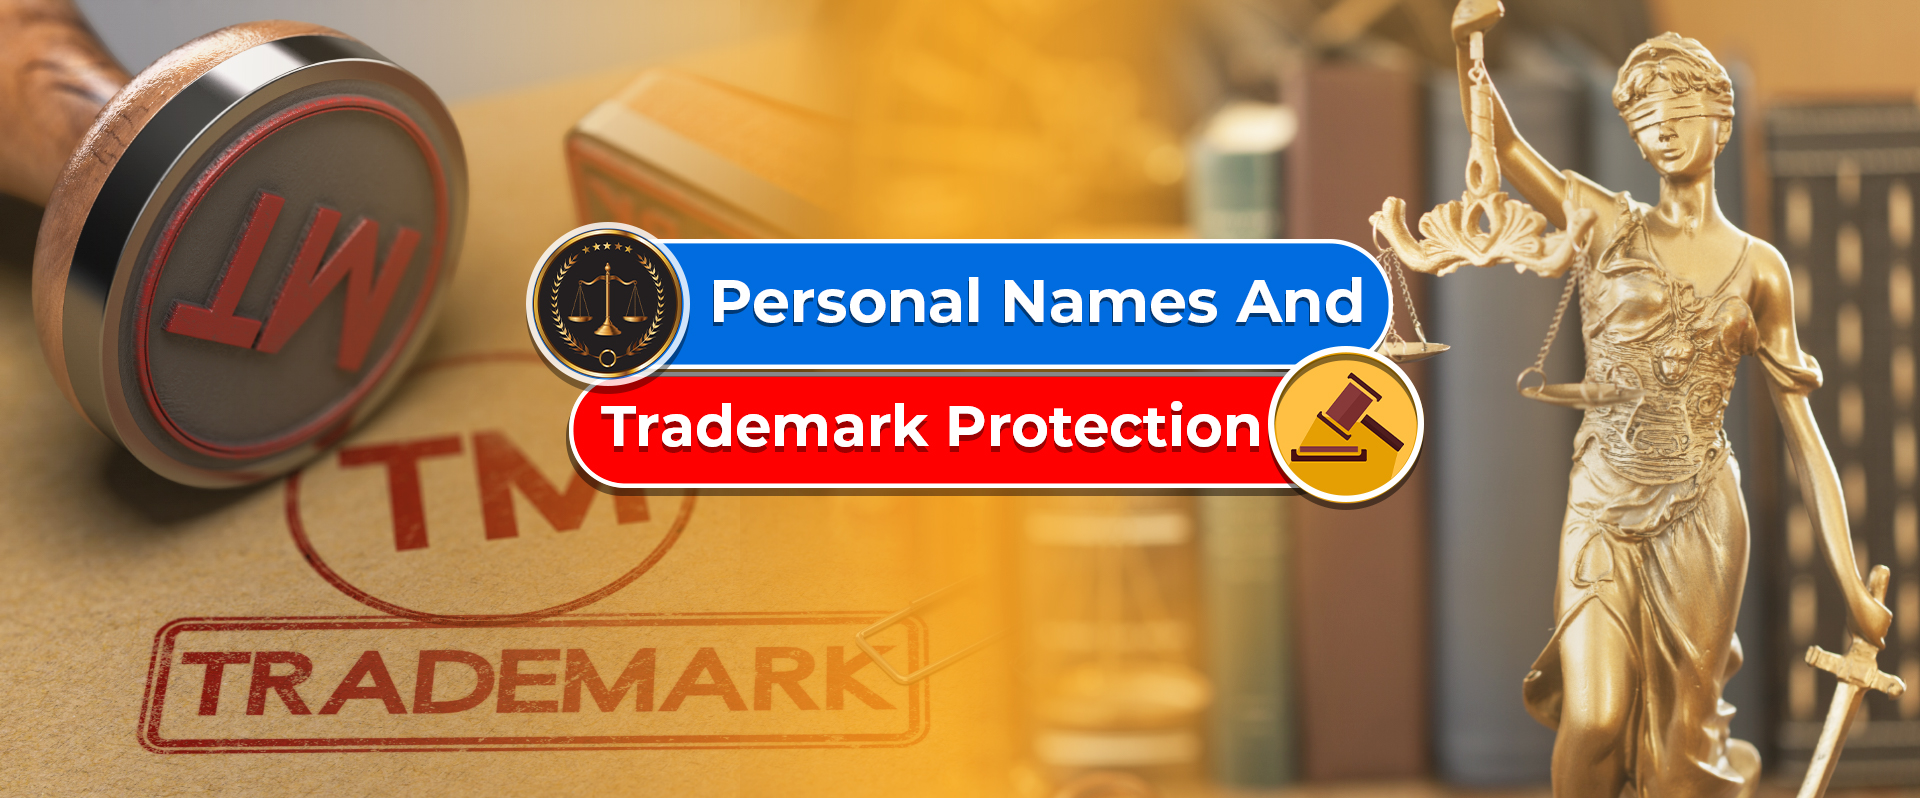 Personal Names and Trademark Protection